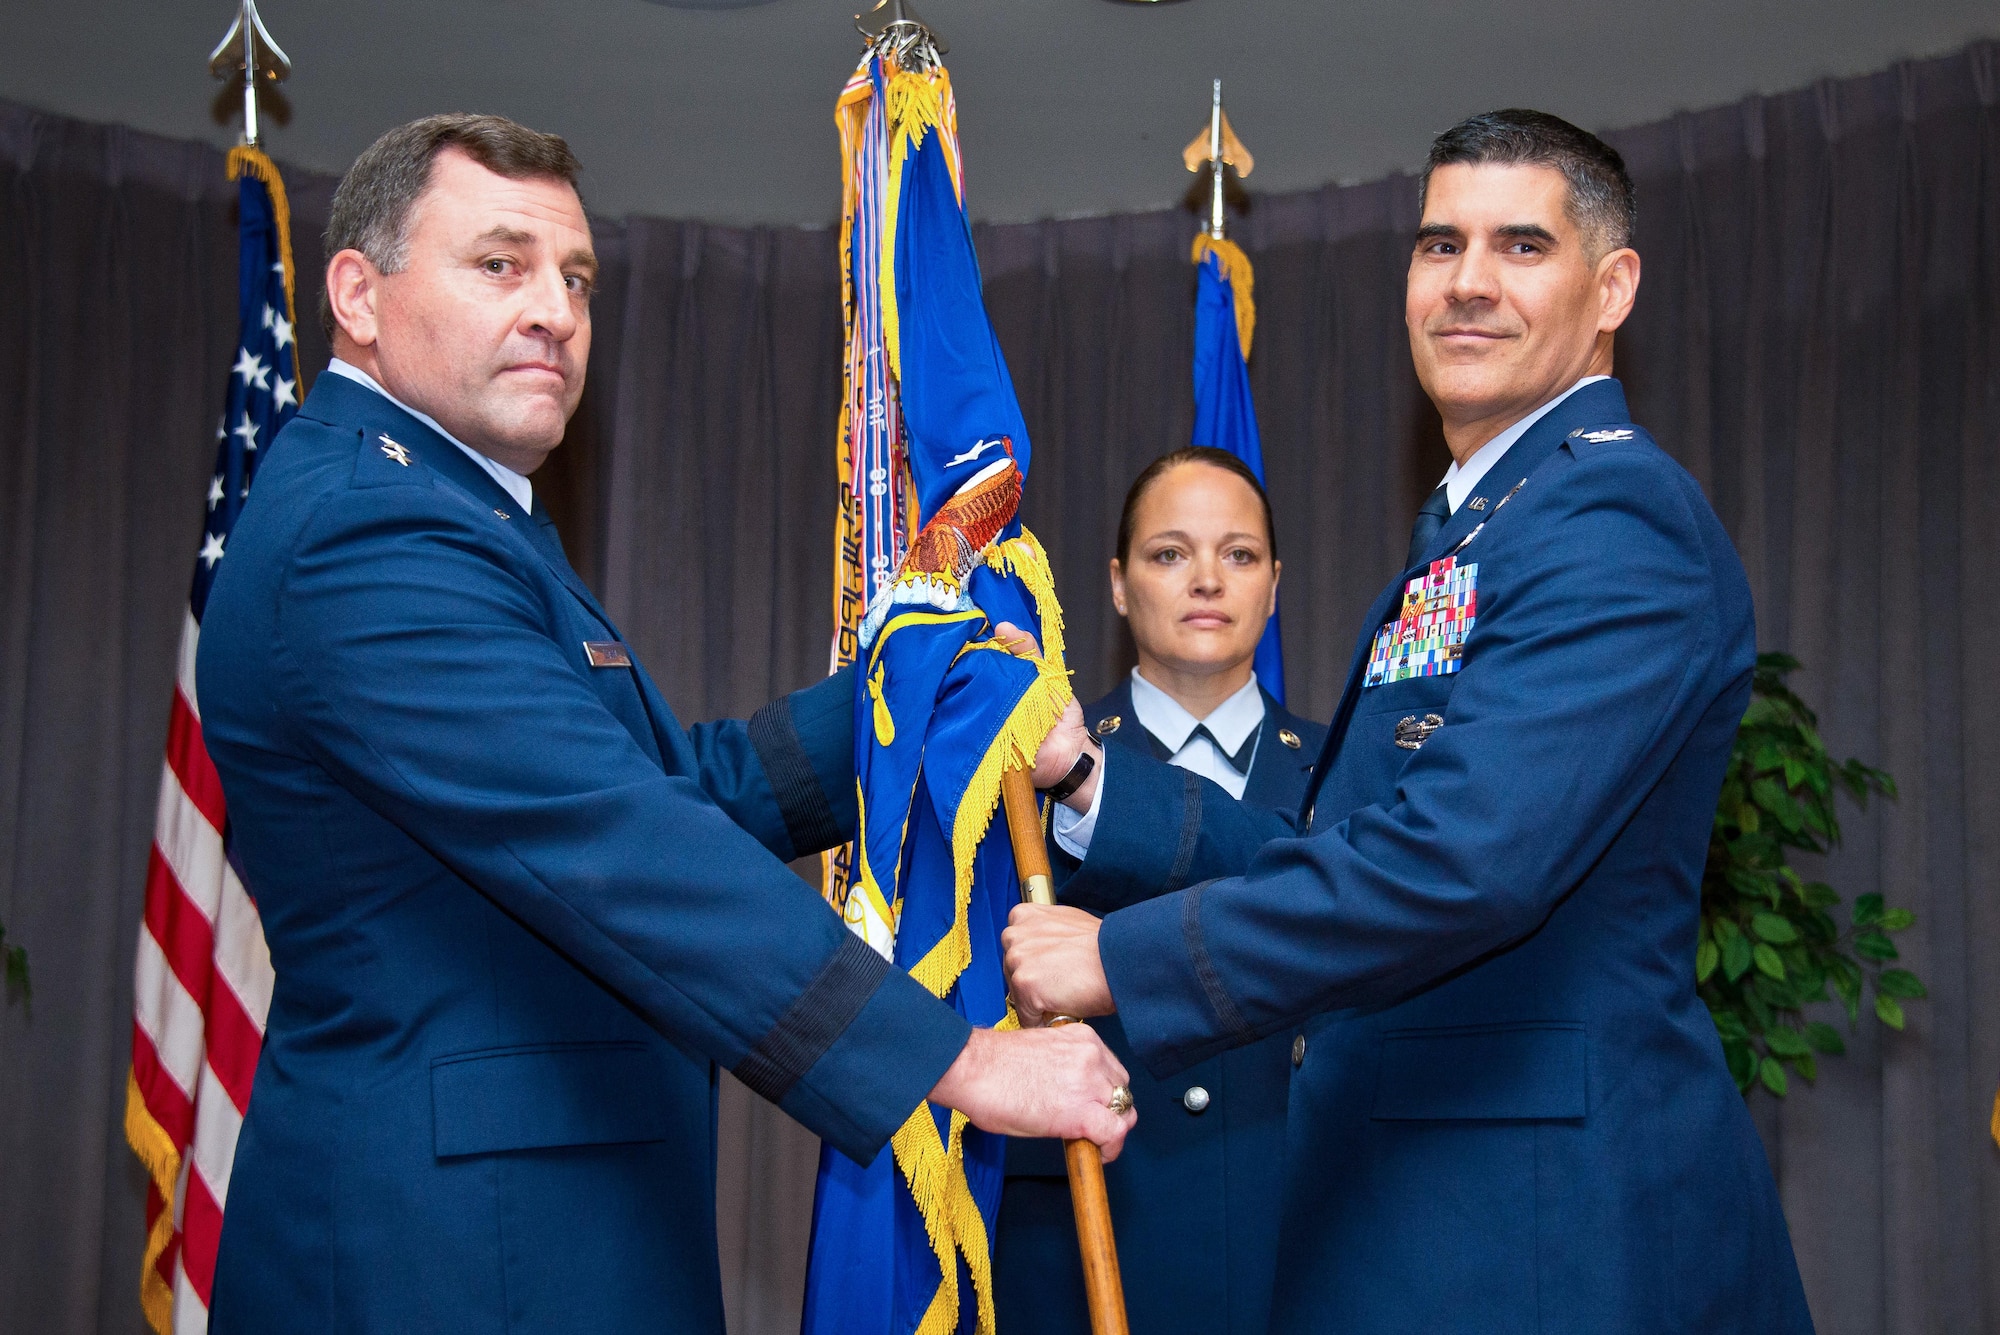 .Maj. Gen. Timothy Leahy, Air University vice commander, transfers command of the 42nd Air Base Wing to Col. Eric Shafa, July 7, 2016, Maxwell Air Force Base, Alabama. Before taking command of the 42nd ABW, Shafa was the commander of the 47th Mission Support Group at Laughlin Air Force Base, Texas, and was a student at Air University’s Squadron Officer School in 1999.  (U.S. Air Force photo/ Donna Burnett.)